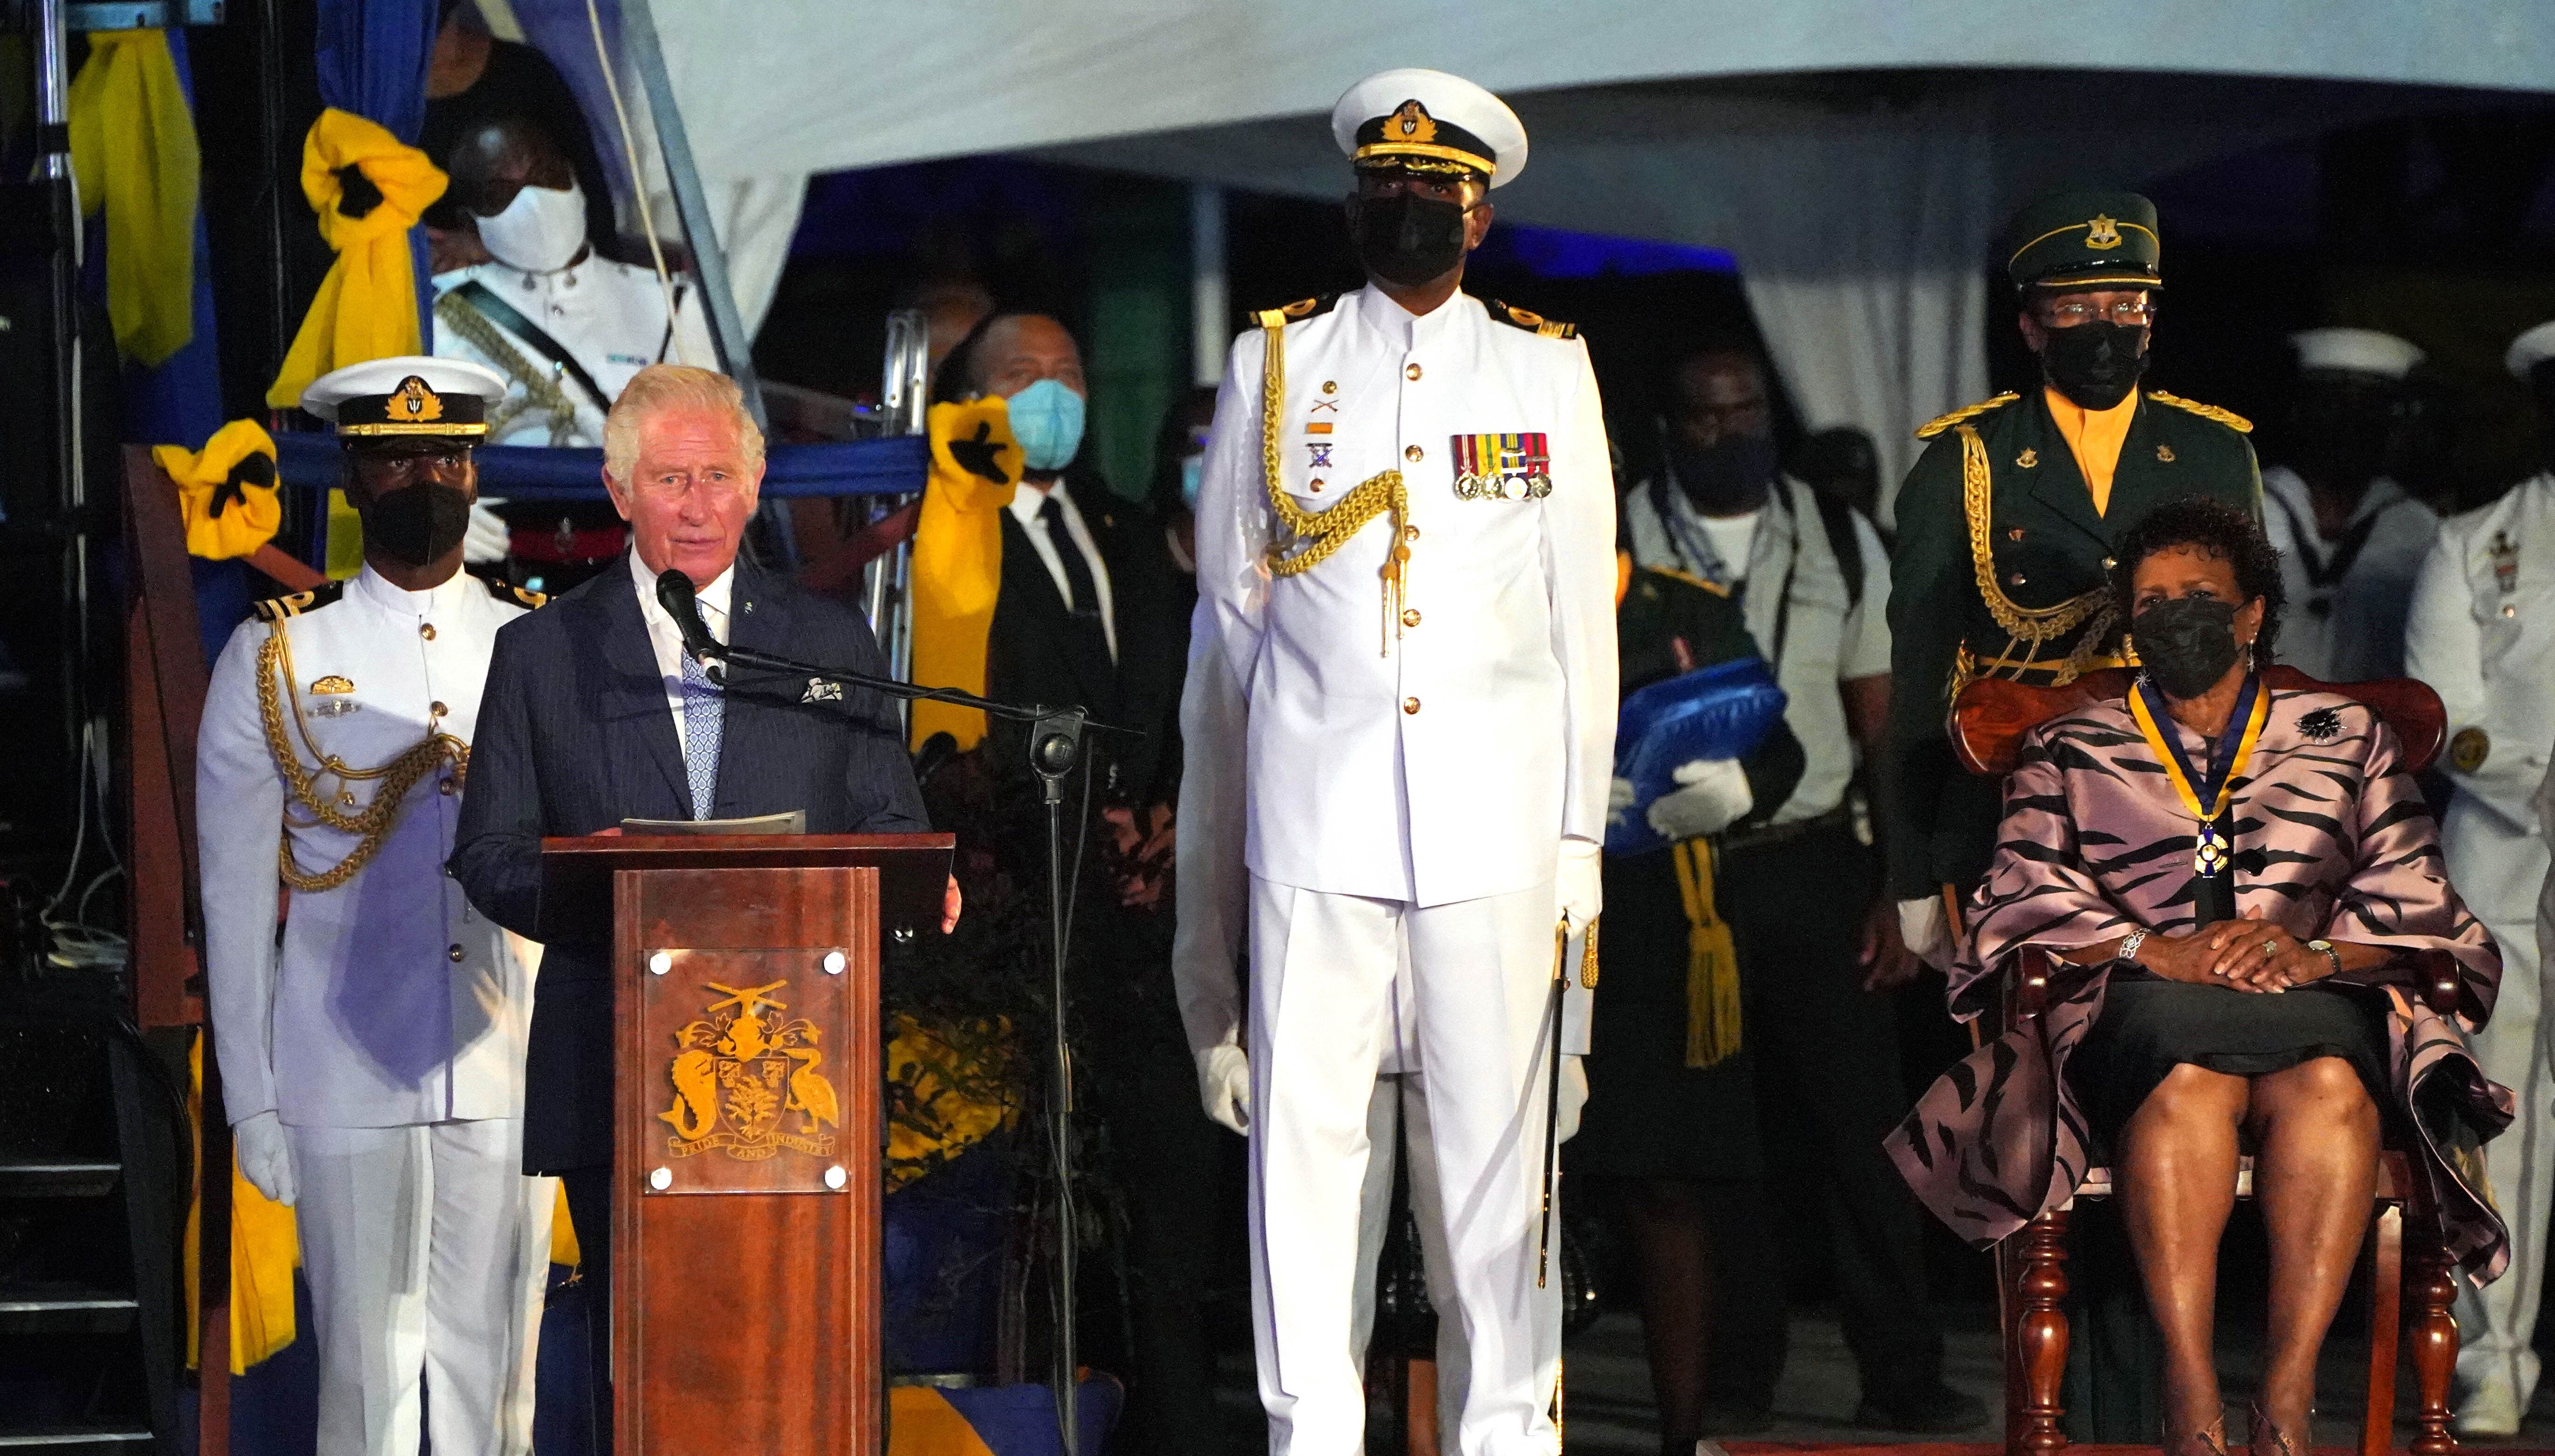 The Prince of Wales (left) makes a speech in Heroes Square in Bridgetown Barbados following a ceremony to mark the country's transition to a republic within the Commonwealth